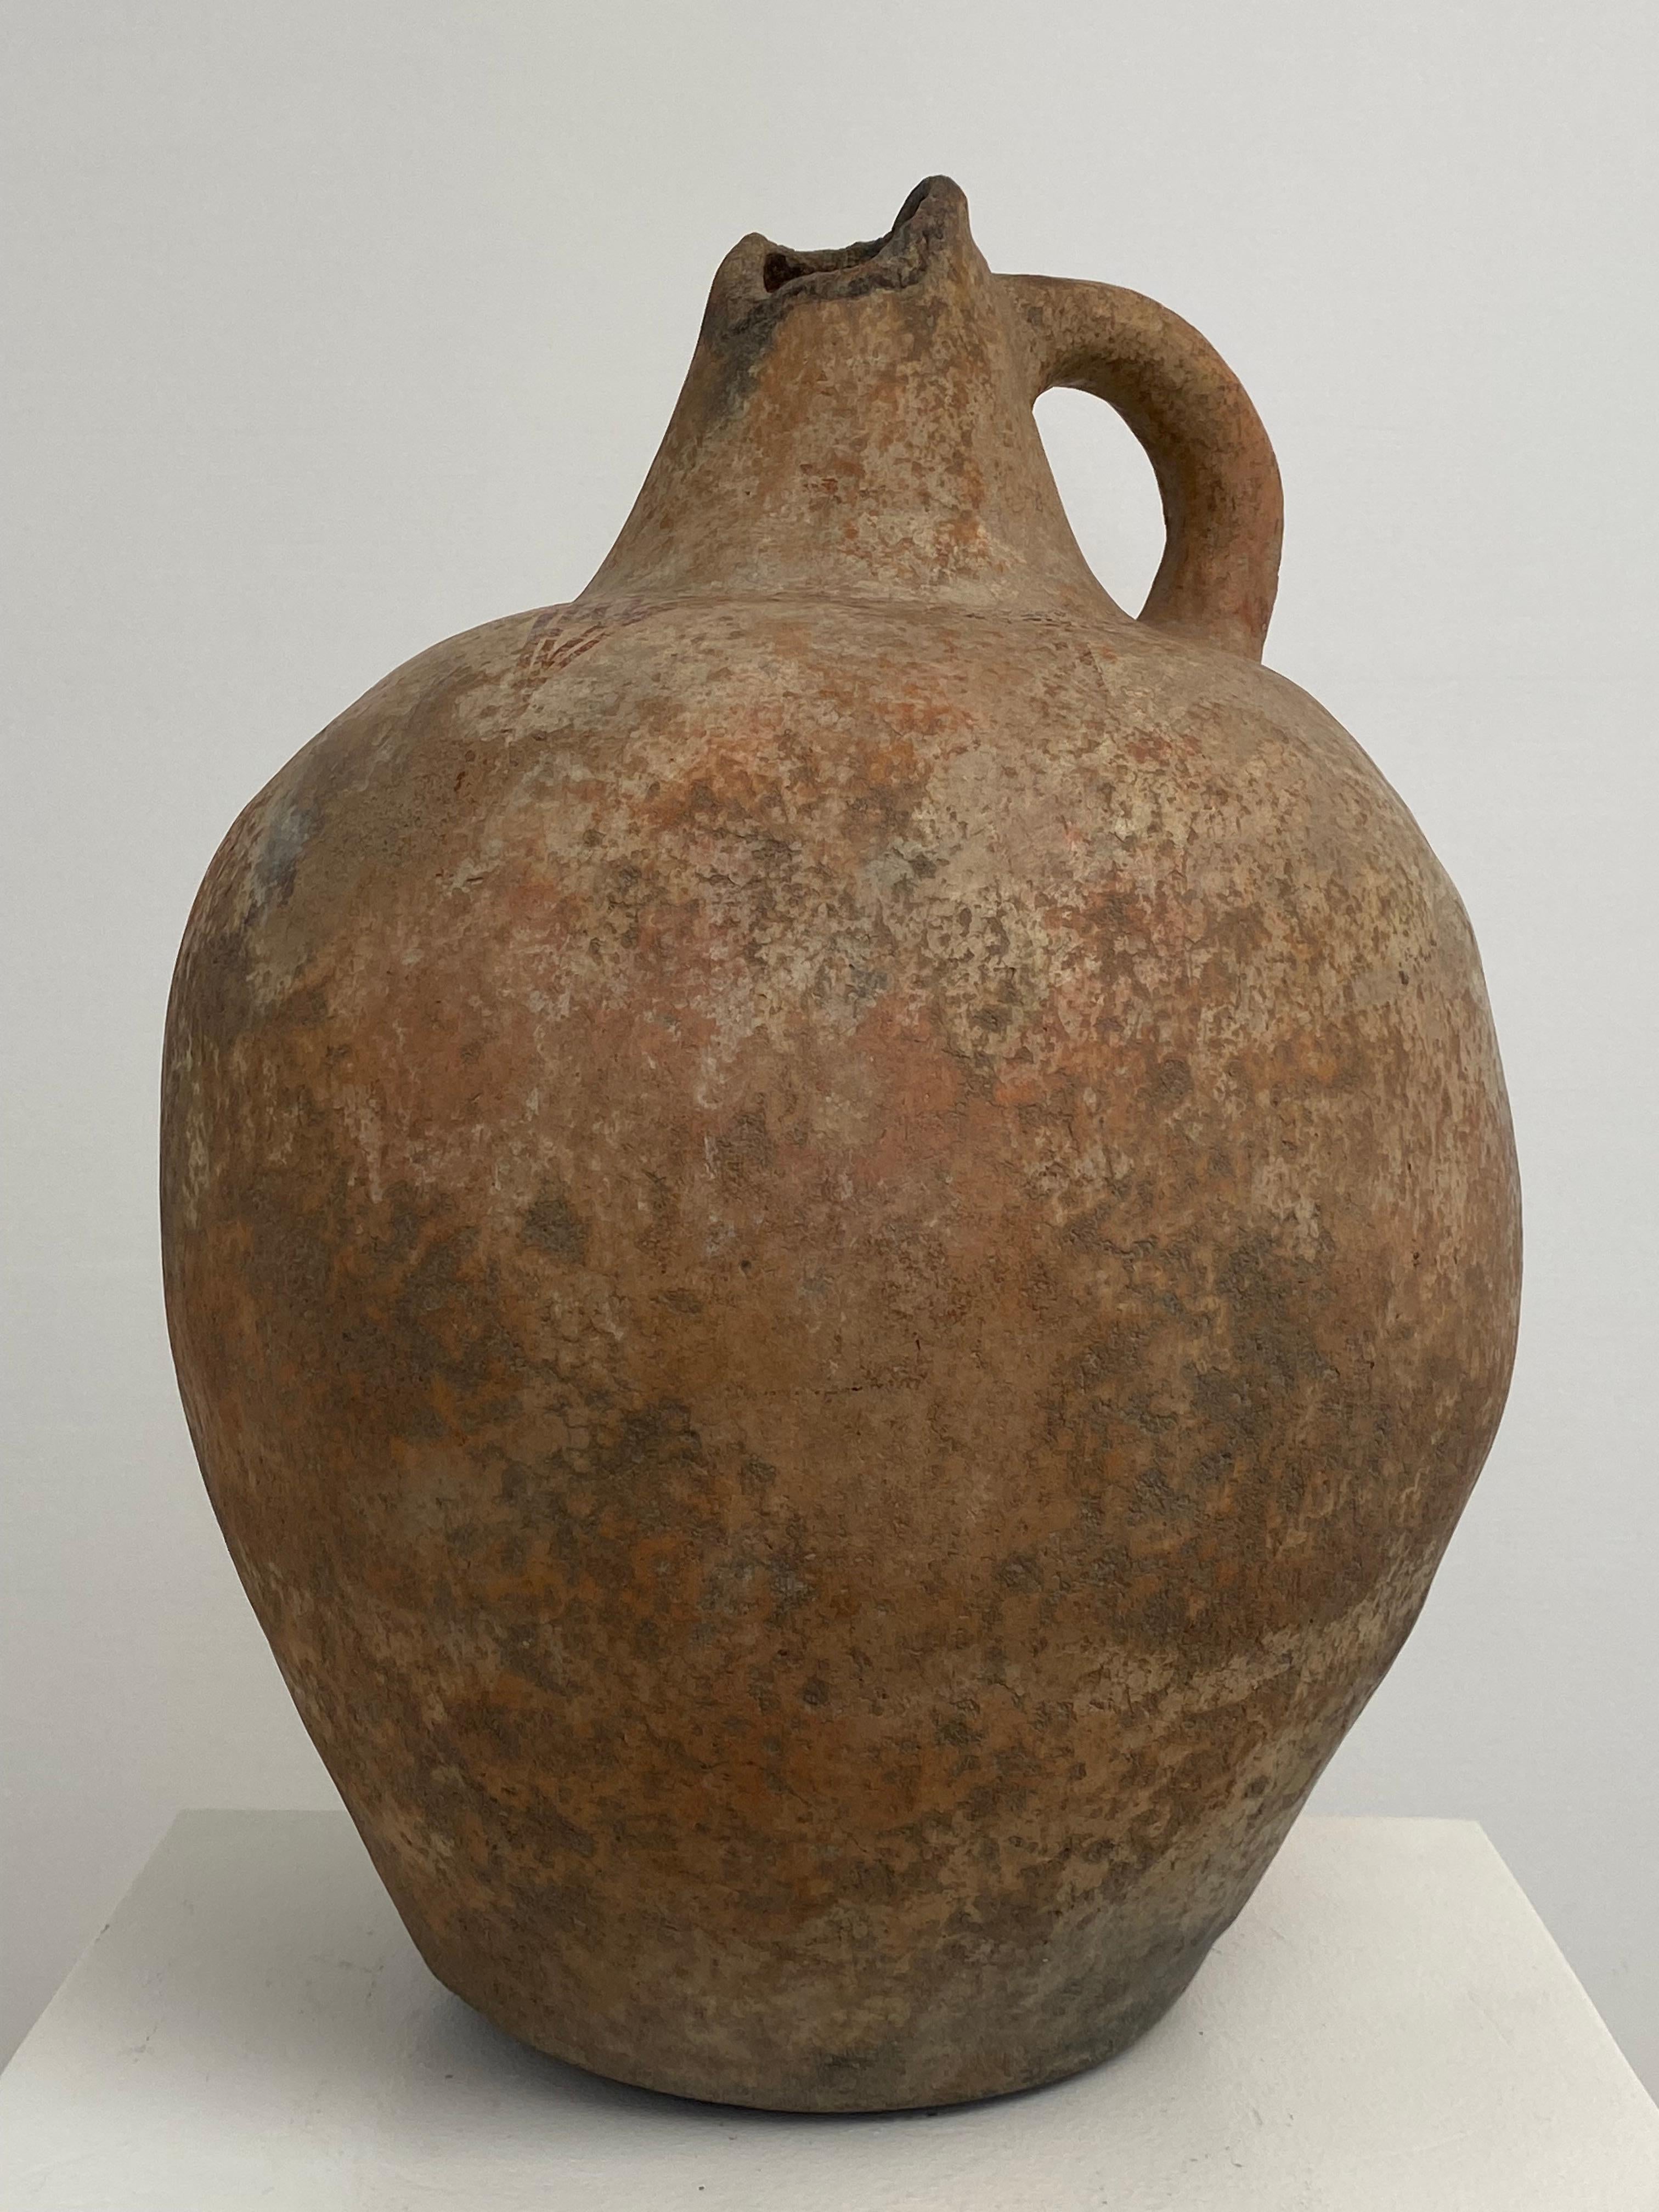 Elegant Berber Terracotta Vase with 1 handle from 1920,
faded decorations and a beautiful Beige and Red Color,
antique Patina and Shine,
very decorative an brutalist piece